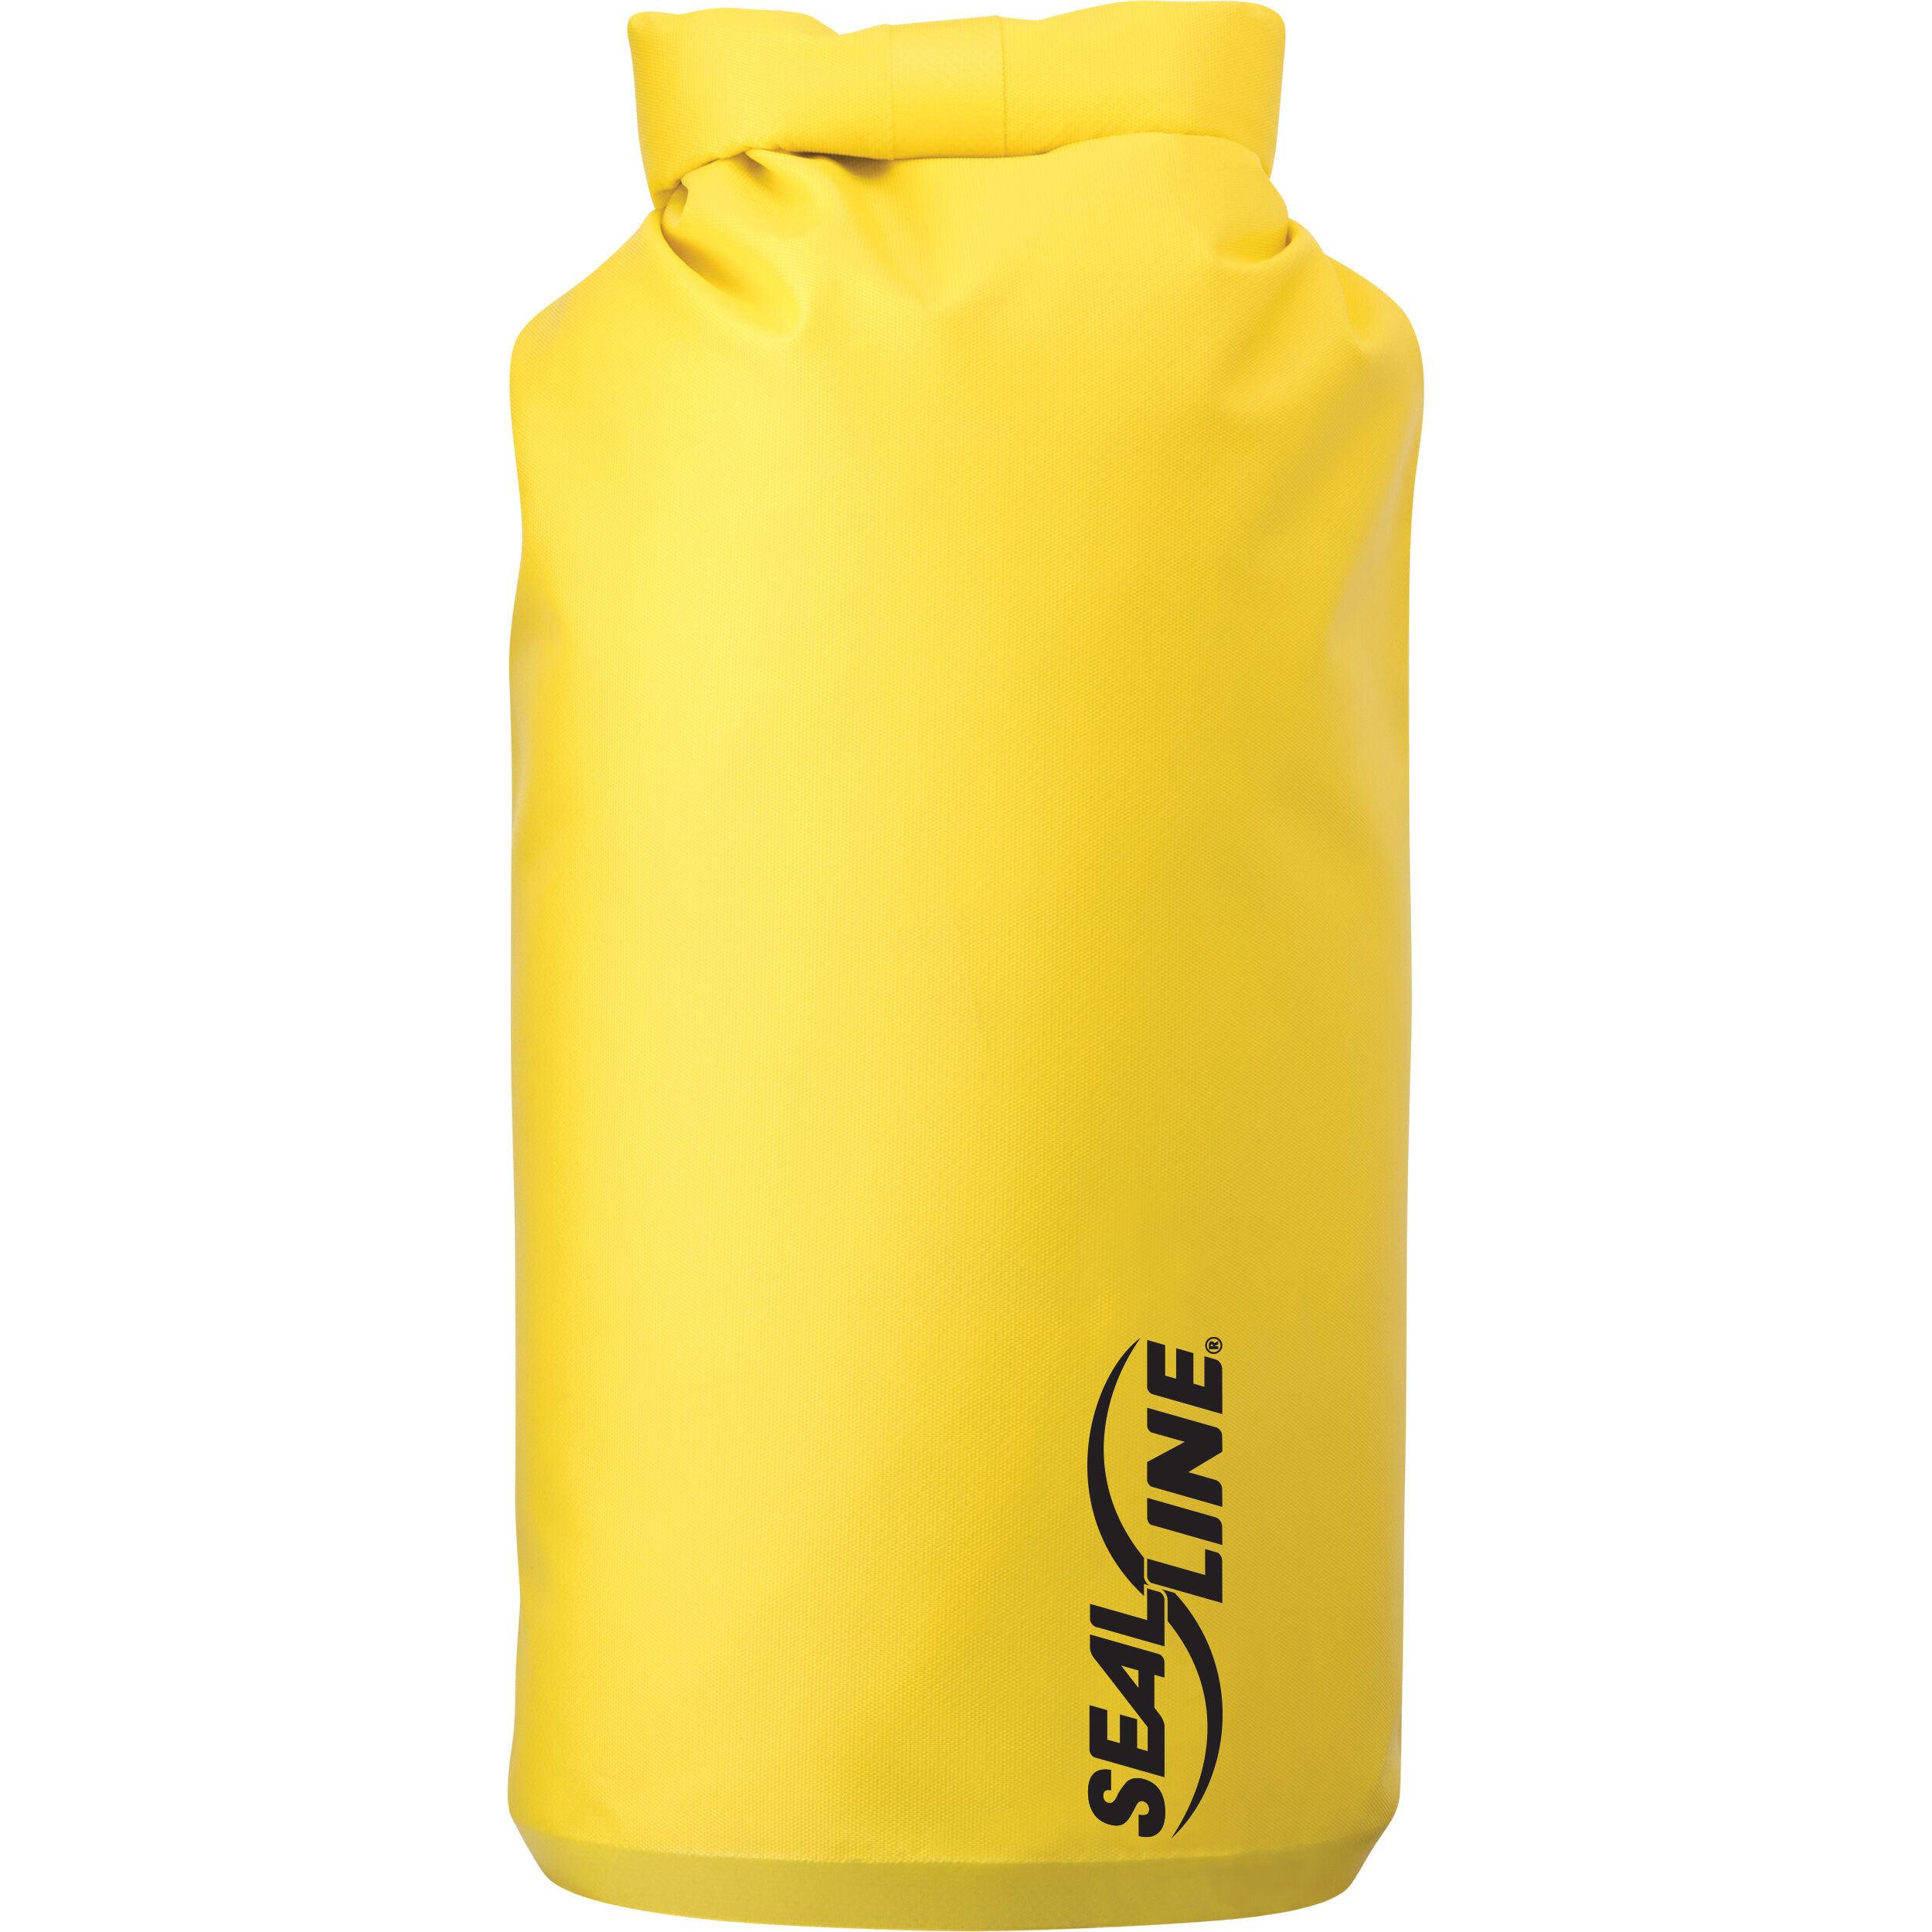 3 SealLine Dry Bags Waterproof Bag Baja 30 HD Bright Green Holds 30 L NEW Details about    